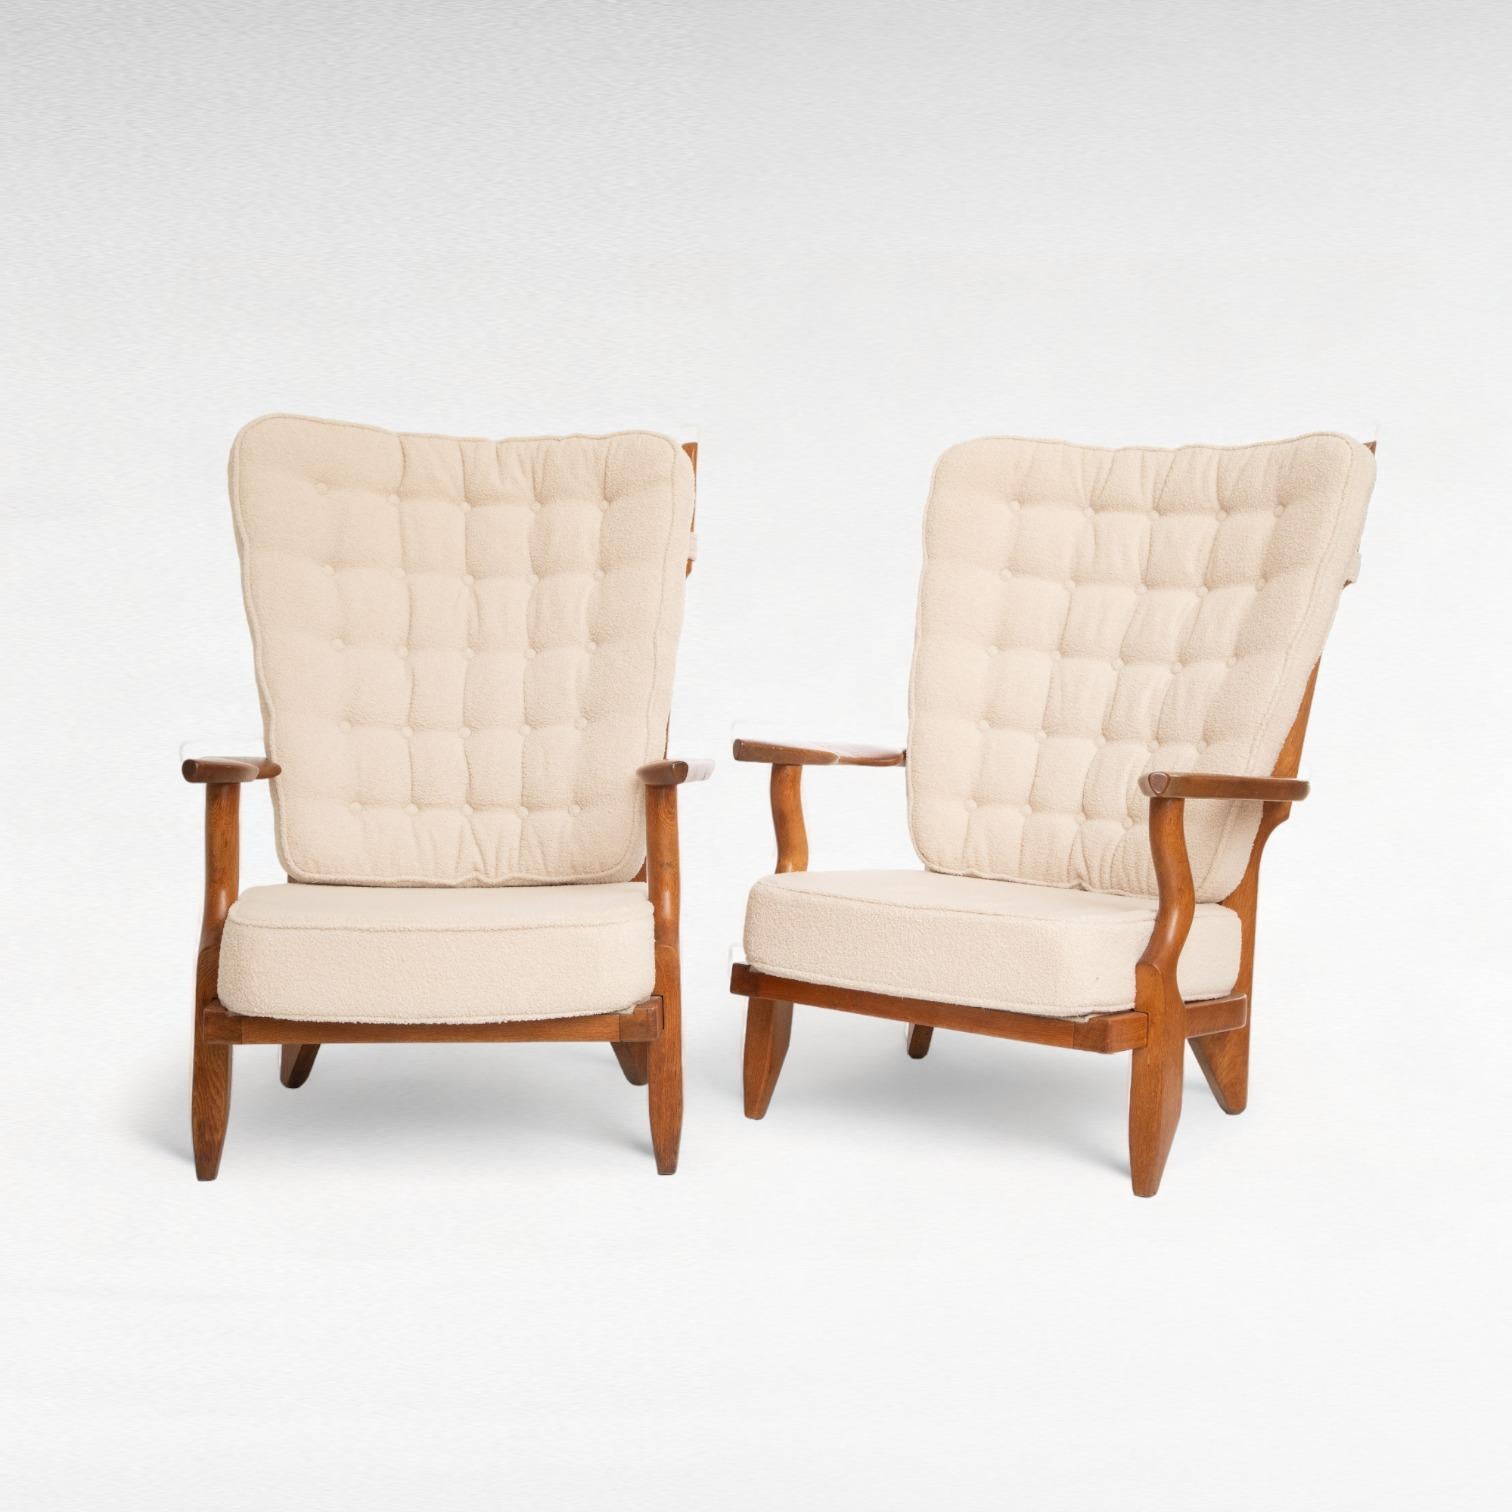 Pair of mid-century modern oak lounge chairs 
 by Guillerme et Chambron, 
France 1950
Model Grand Repos
Sculptural organic shape, finger back 
Retains a beautiful warm patina
These chairs are newly upholstered with an ecru microfiber boucle, with